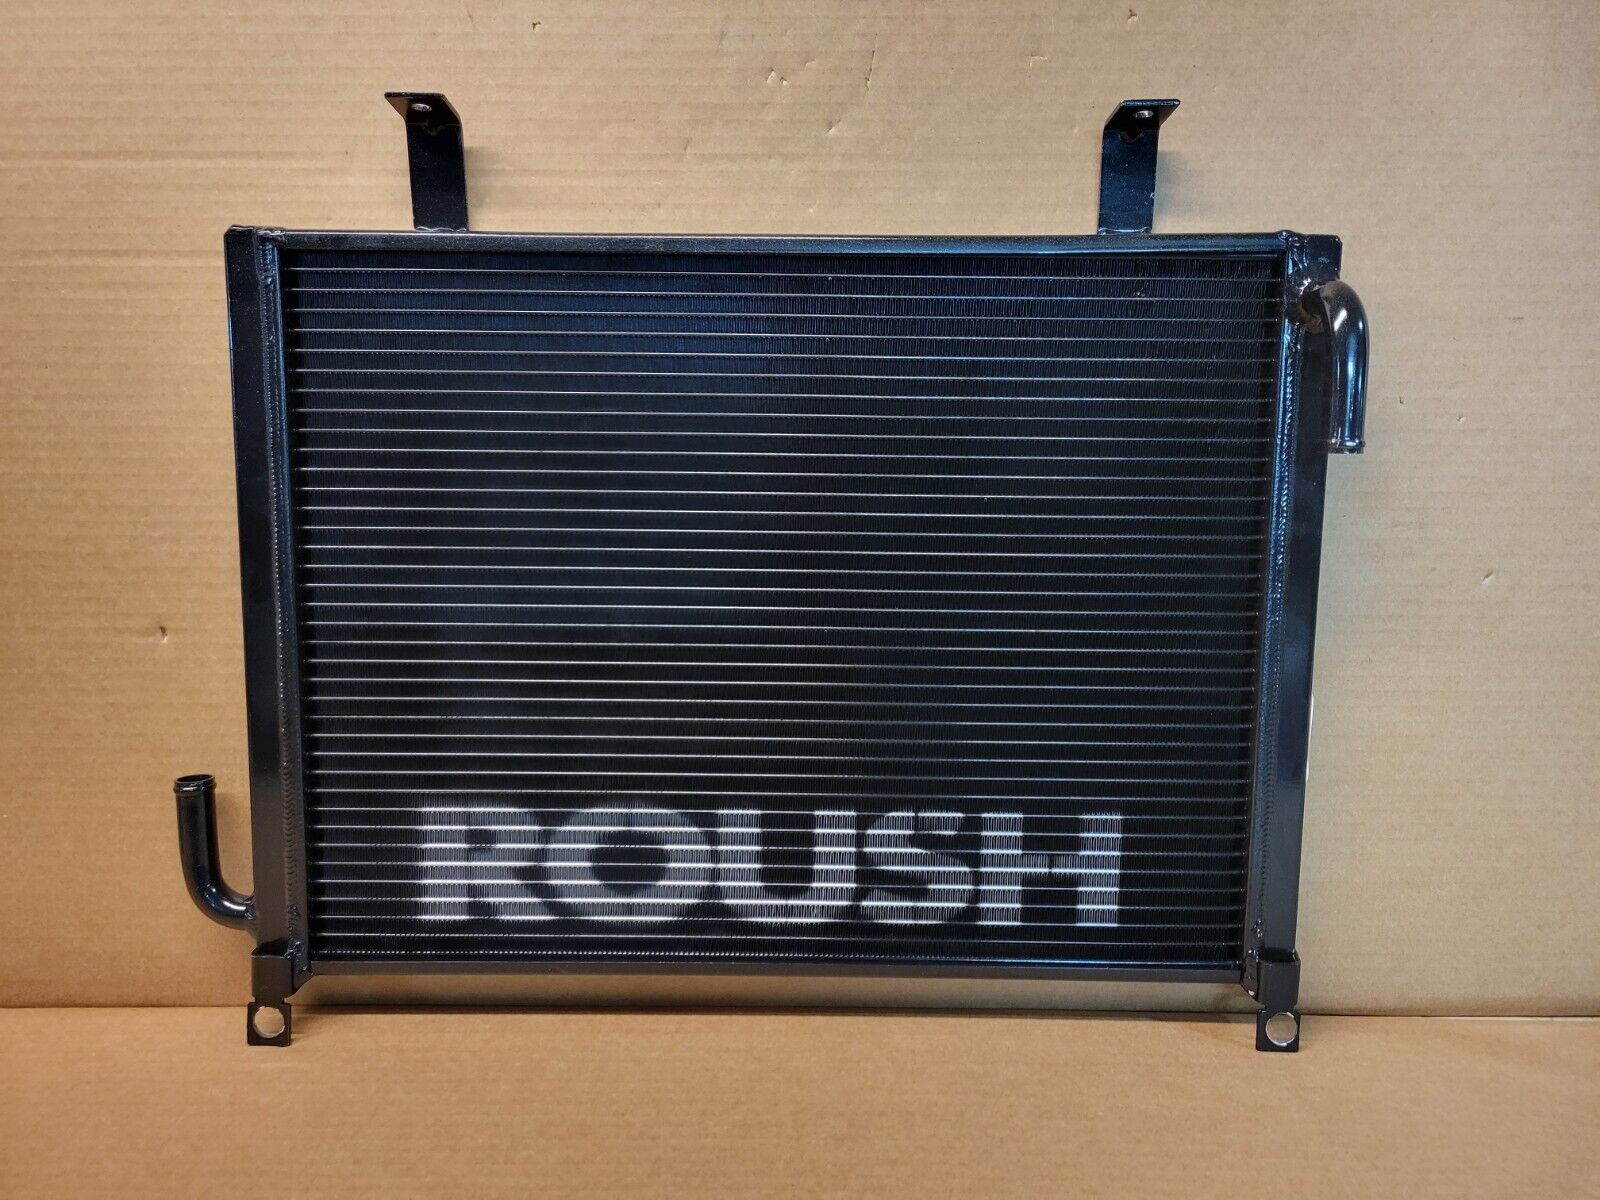 New Roush Supercharger Low Temp Radiator Fits 2015-2017 Mustang 5.0L  13158k229R